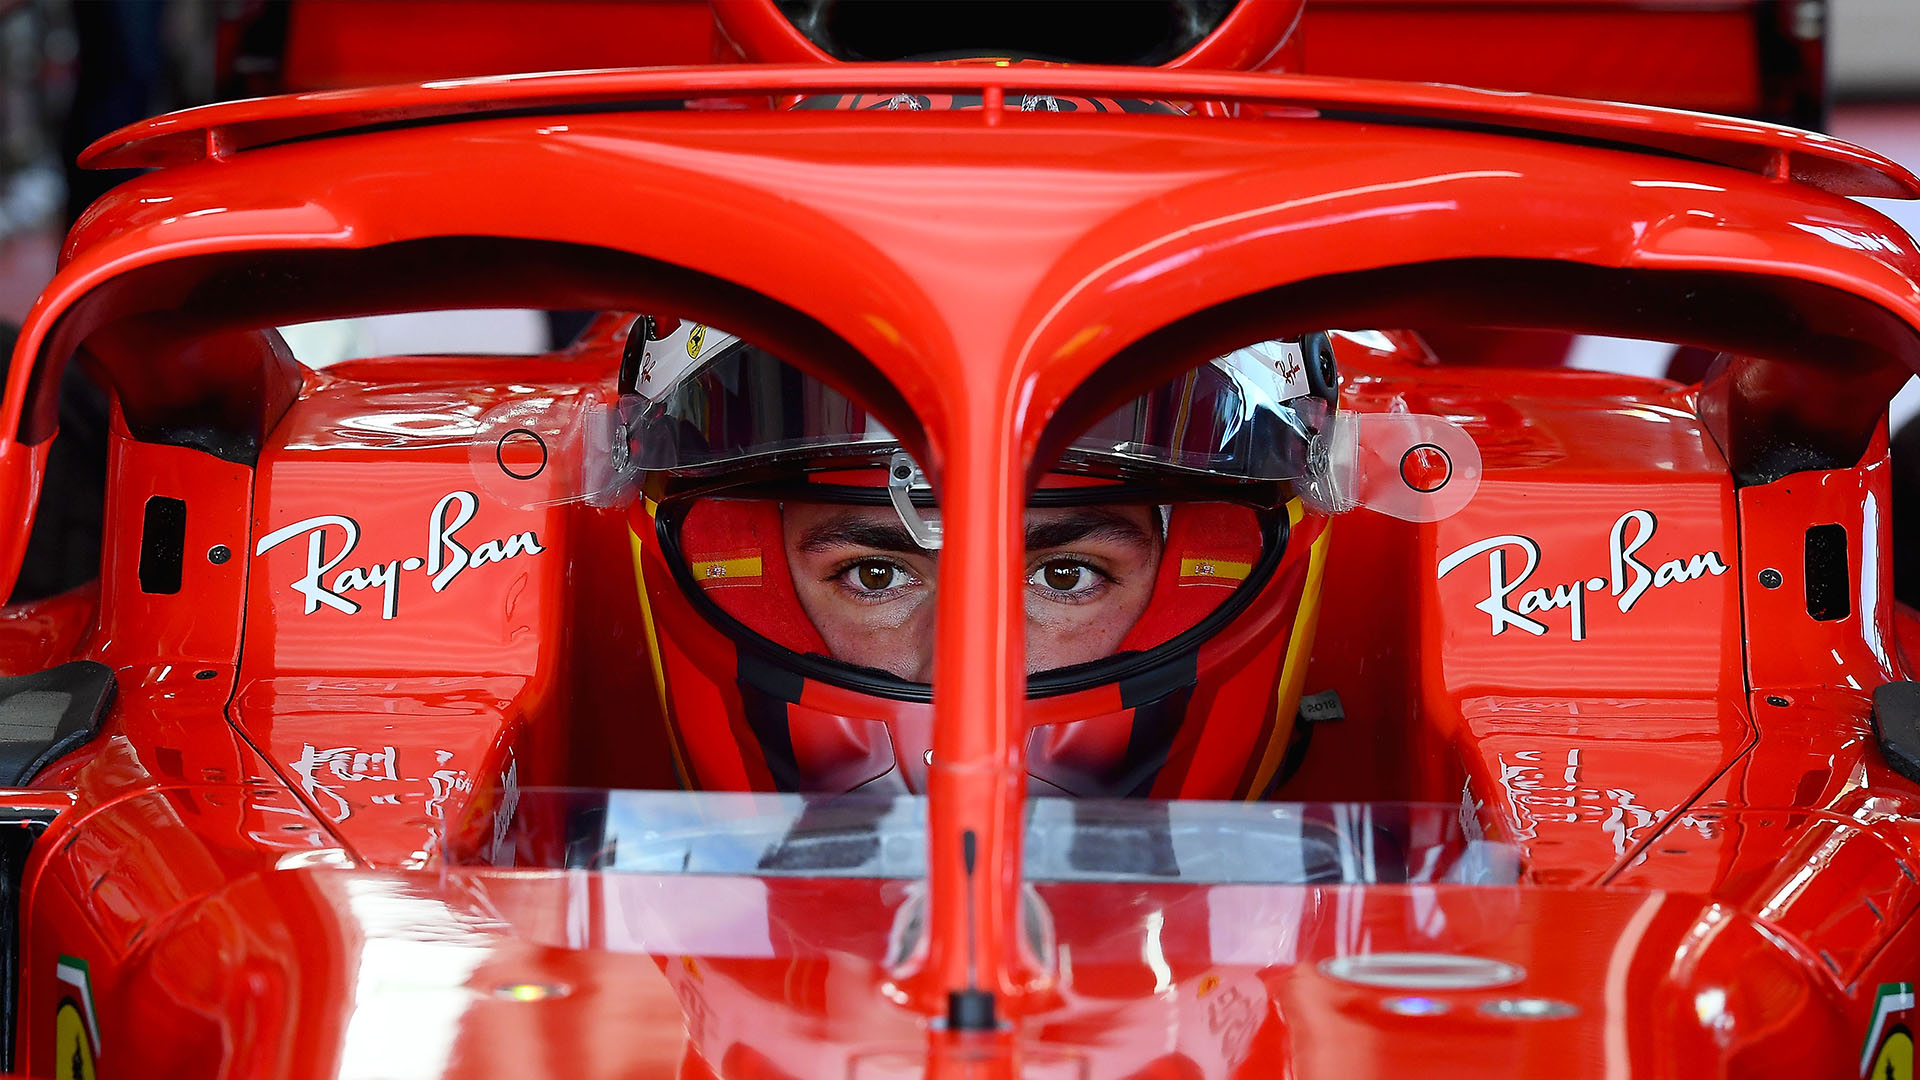 Sainz hails 'special moment' as he completes 'extensive' debut test with Ferrari. Formula 1®